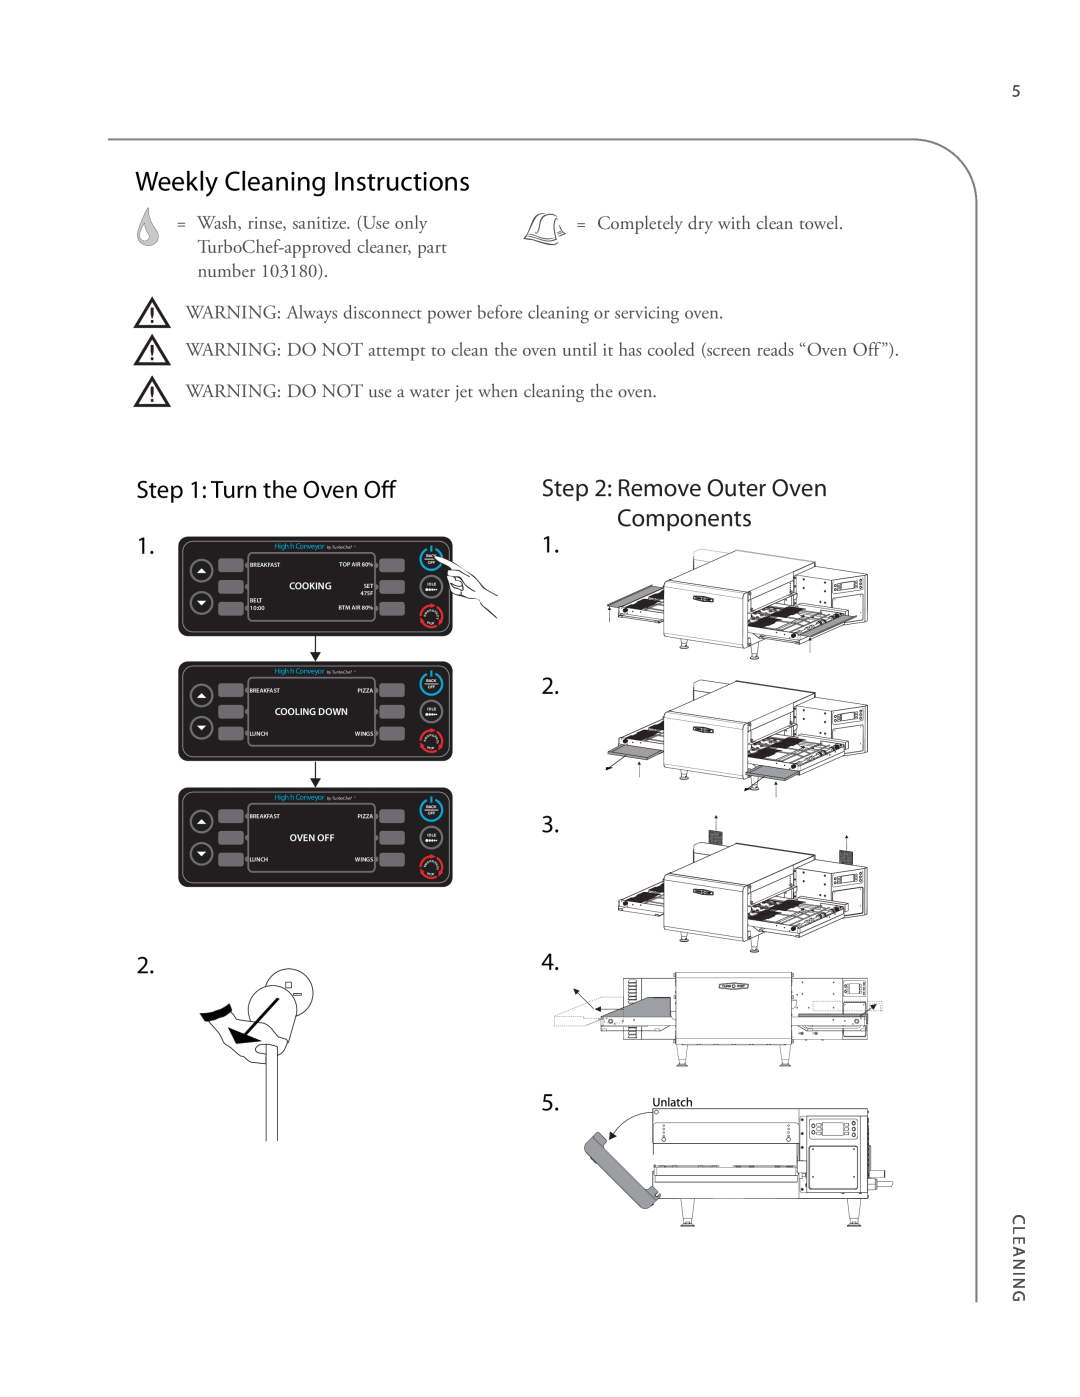 Turbo Chef Technologies 2020 HIGH h manual Weekly Cleaning Instructions, Remove Outer Oven Components, Turn the Oven Off 